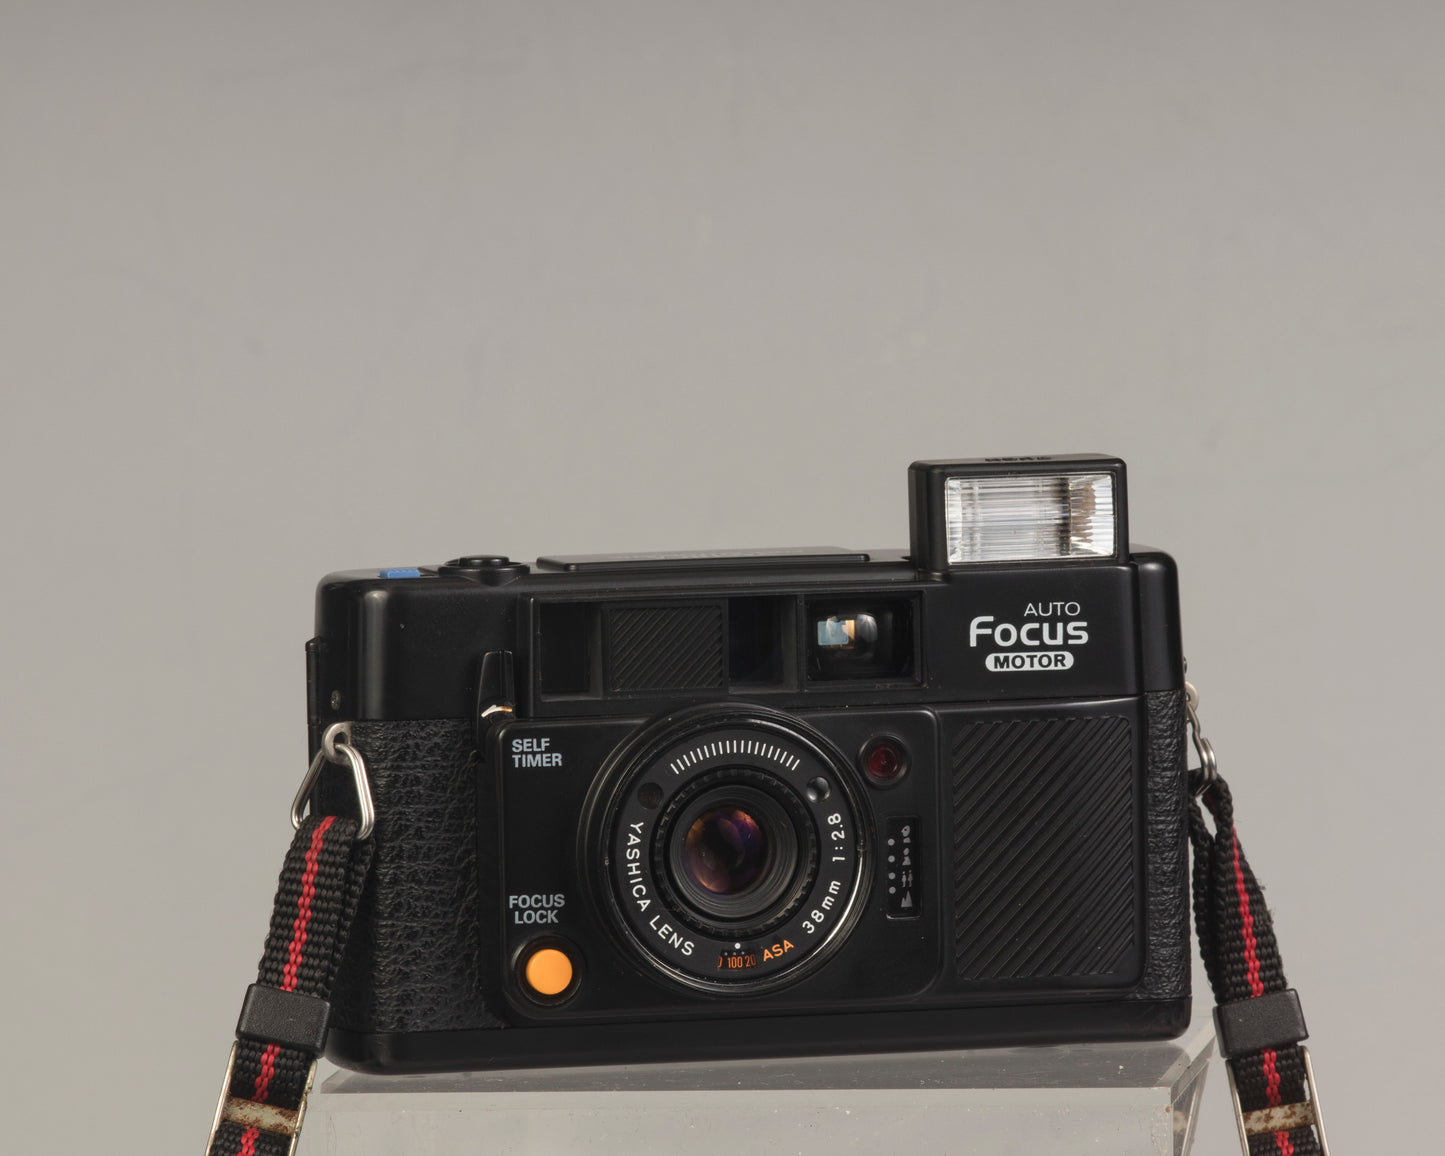 The Yashica Auto Focus Motor (shown with flash popped up) is a classic 35mm point-and-shoot film camera featuring a 38mm f2.8 lens